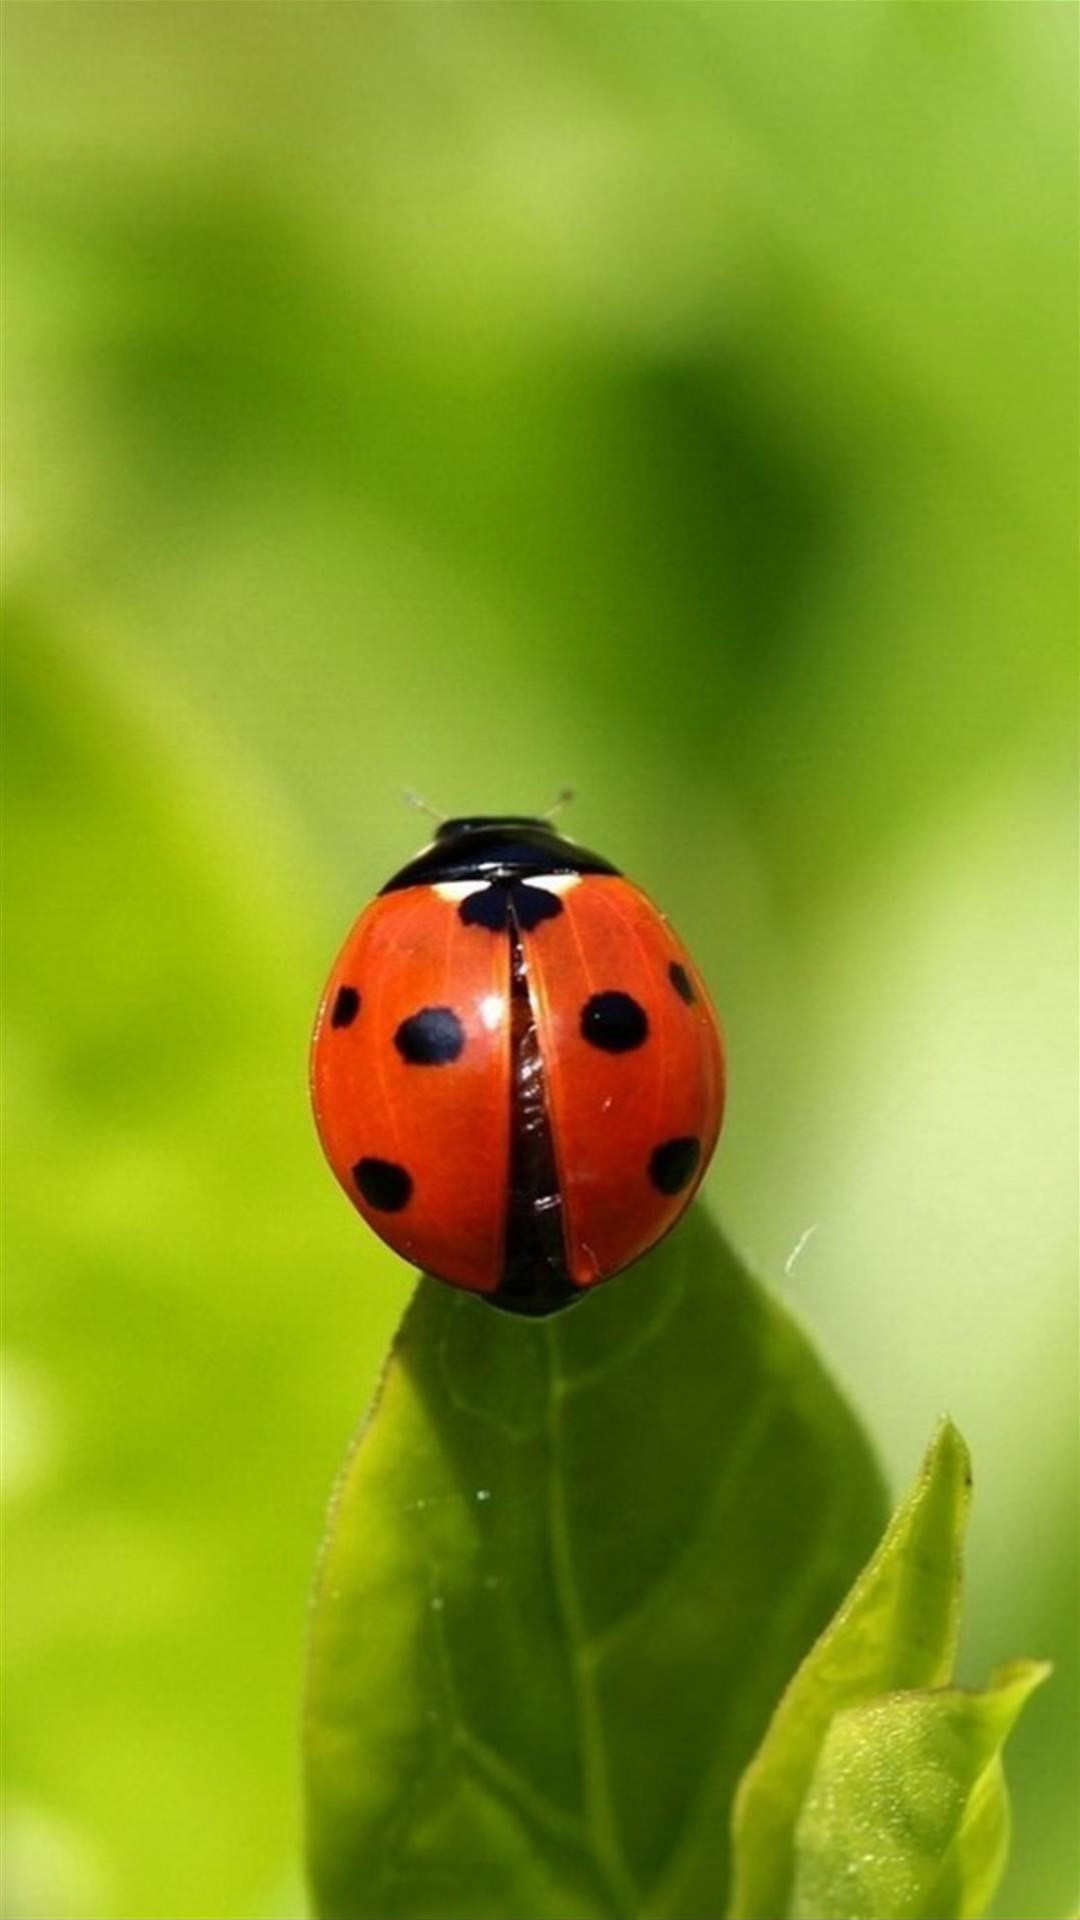 1080x1920 Ladybug on green leaf Galaxy Note 3 Wallpapers Galaxy Note 3 Wallpapers